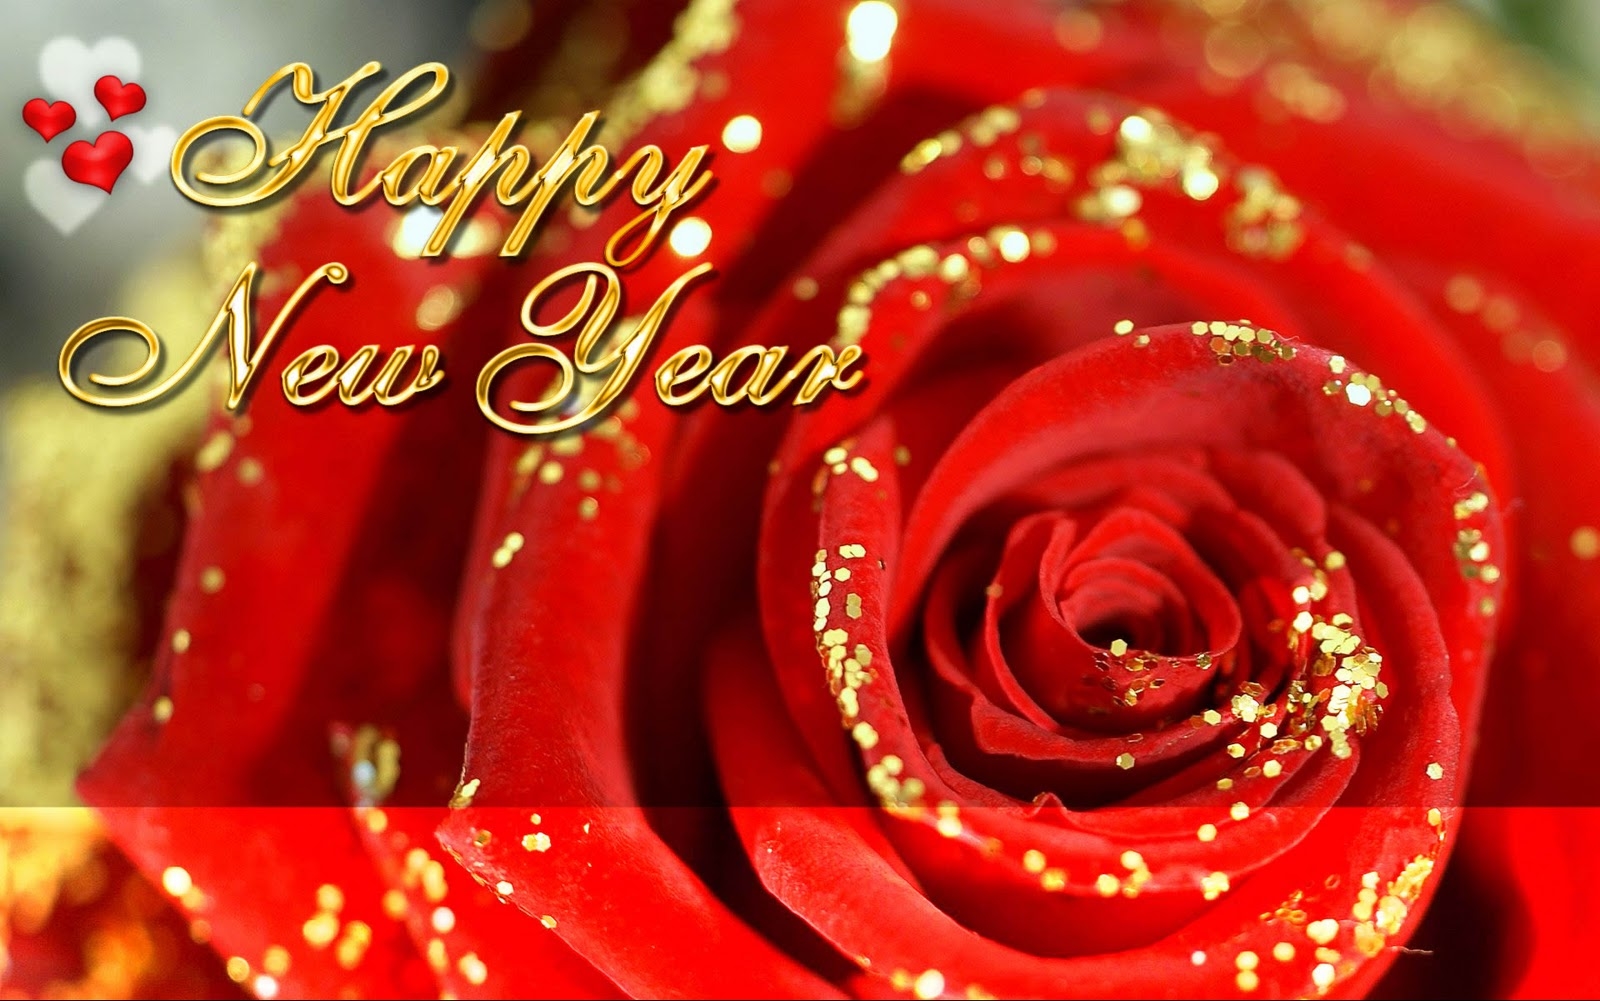 Most Beautiful Happy New Year Wishes Greetings Cards Wallpapers 2013 012